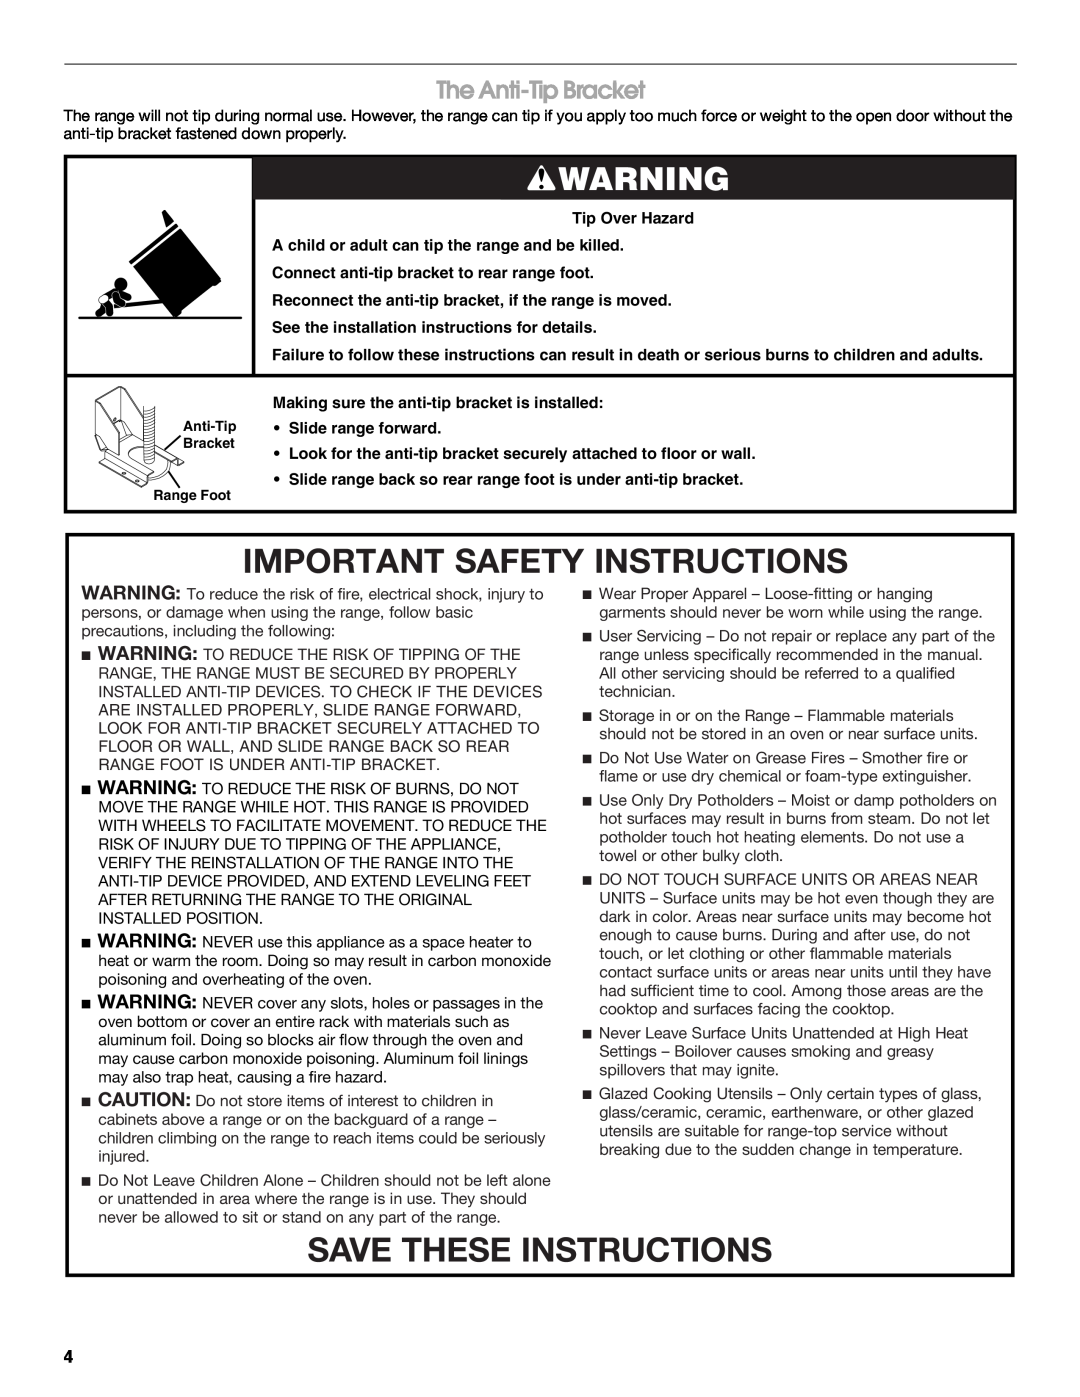 Jenn-Air JDRP436, JDRP536, JDRP430, JDRP548 Important Safety Instructions, Save These Instructions, The Anti-Tip Bracket 